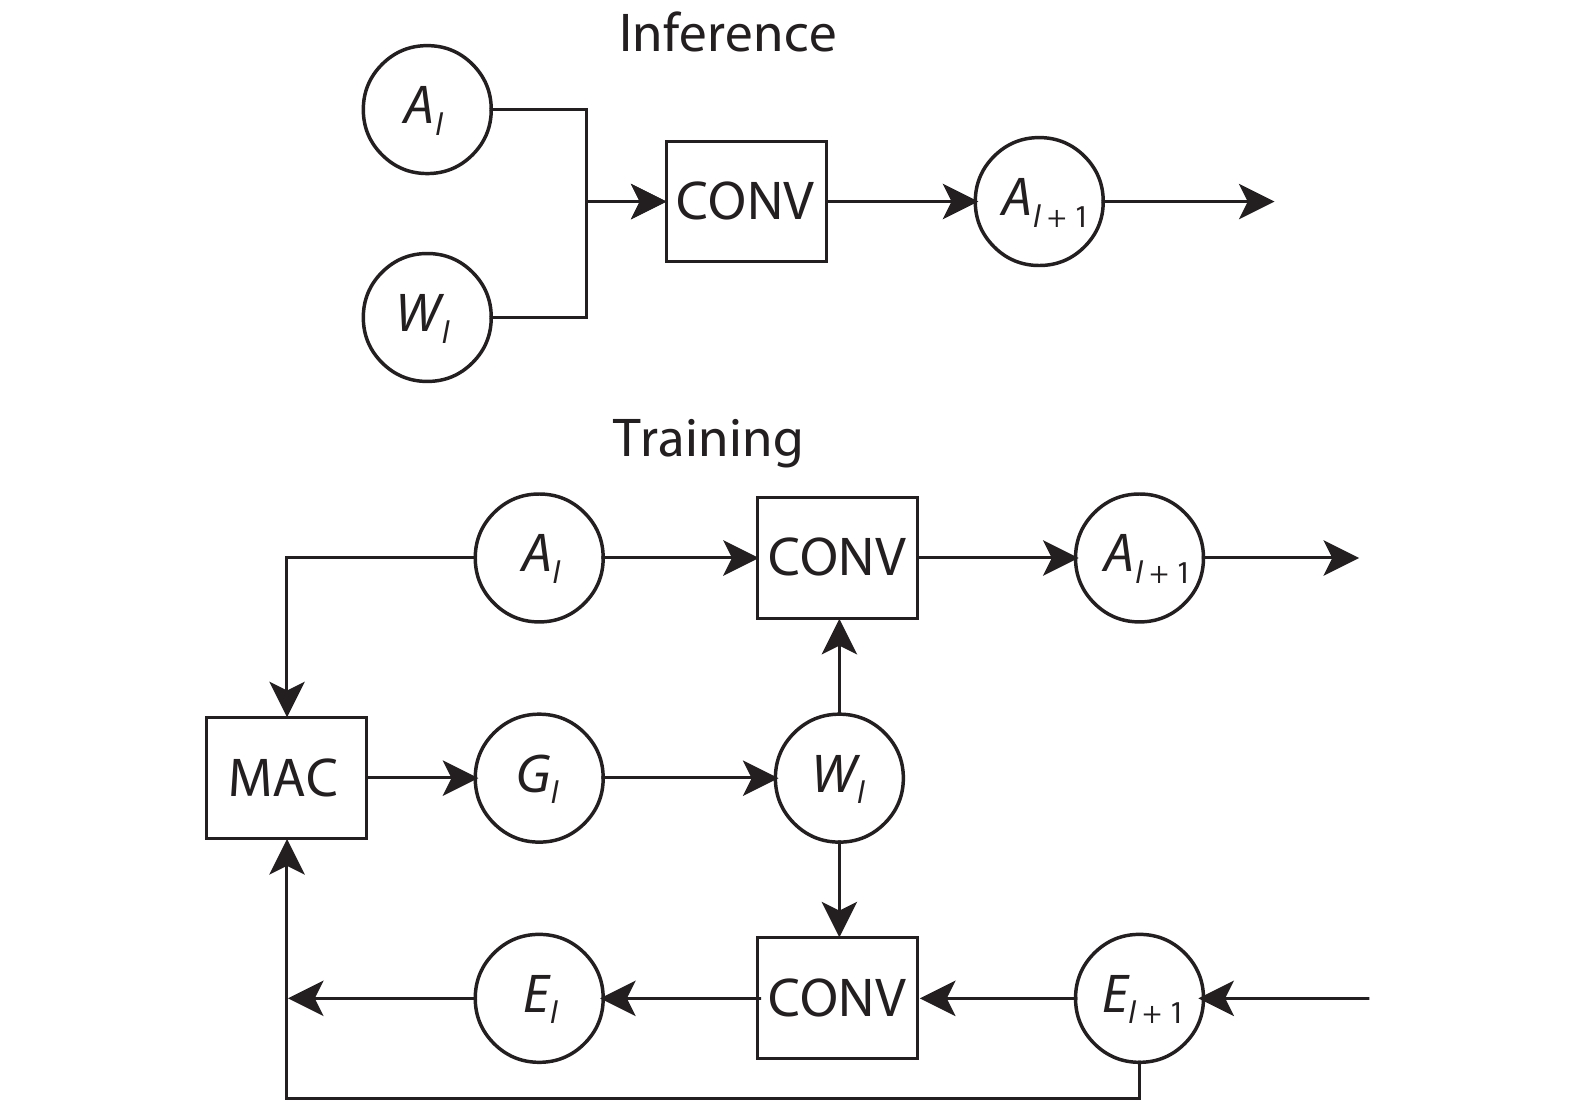 A overview of inference and training processes on the convolutional layer.